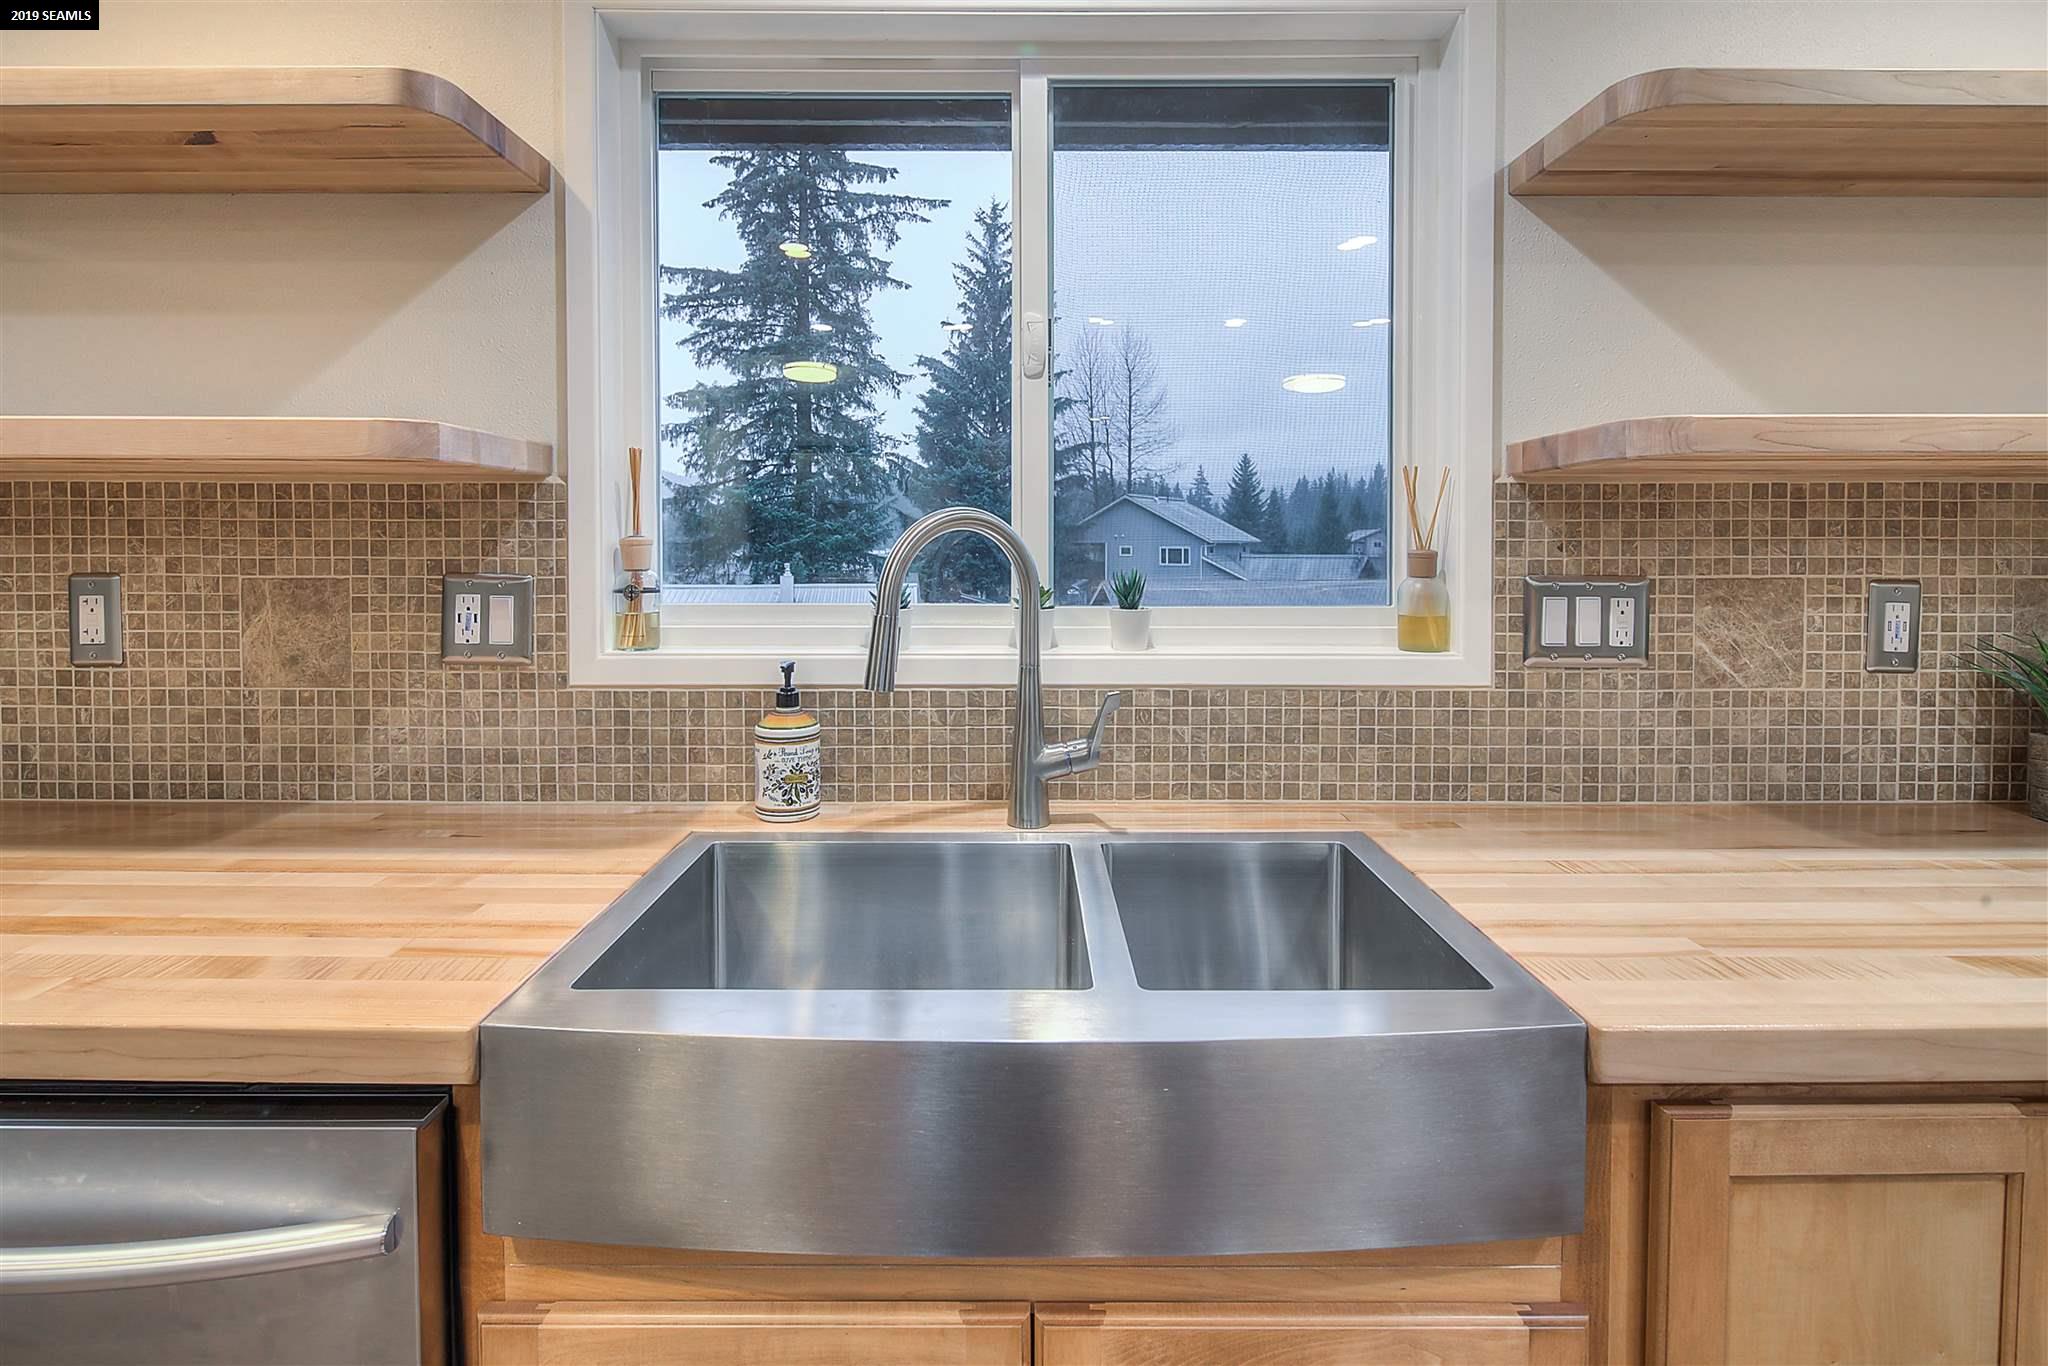 Stainless Farm Sink!